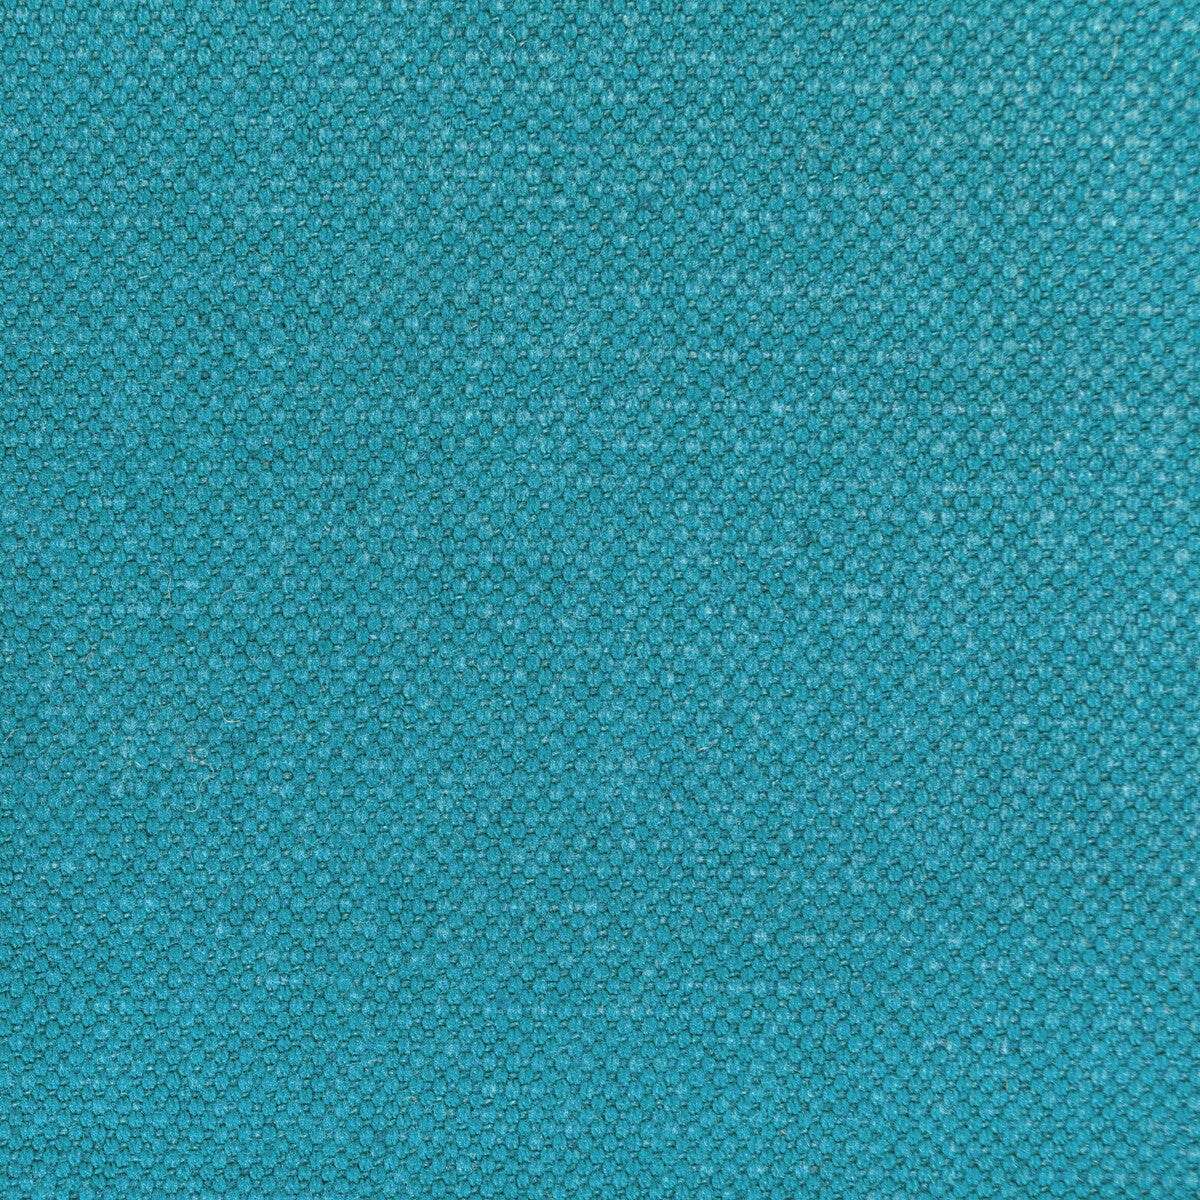 Carson fabric in teal color - pattern 36282.5.0 - by Kravet Basics